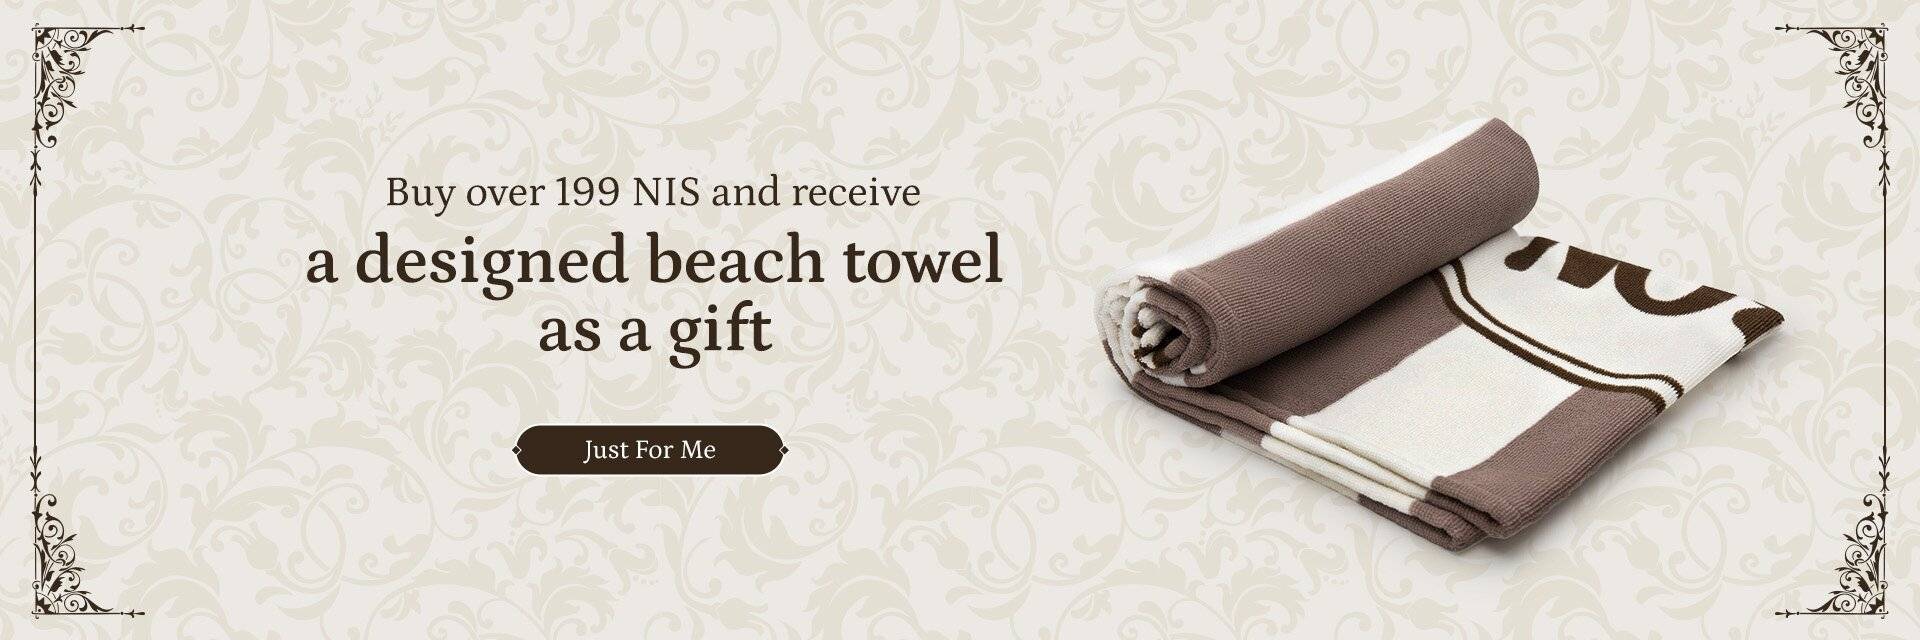 Buy over NIS 199 receive a beach towel as a gift. Go to the products page: 